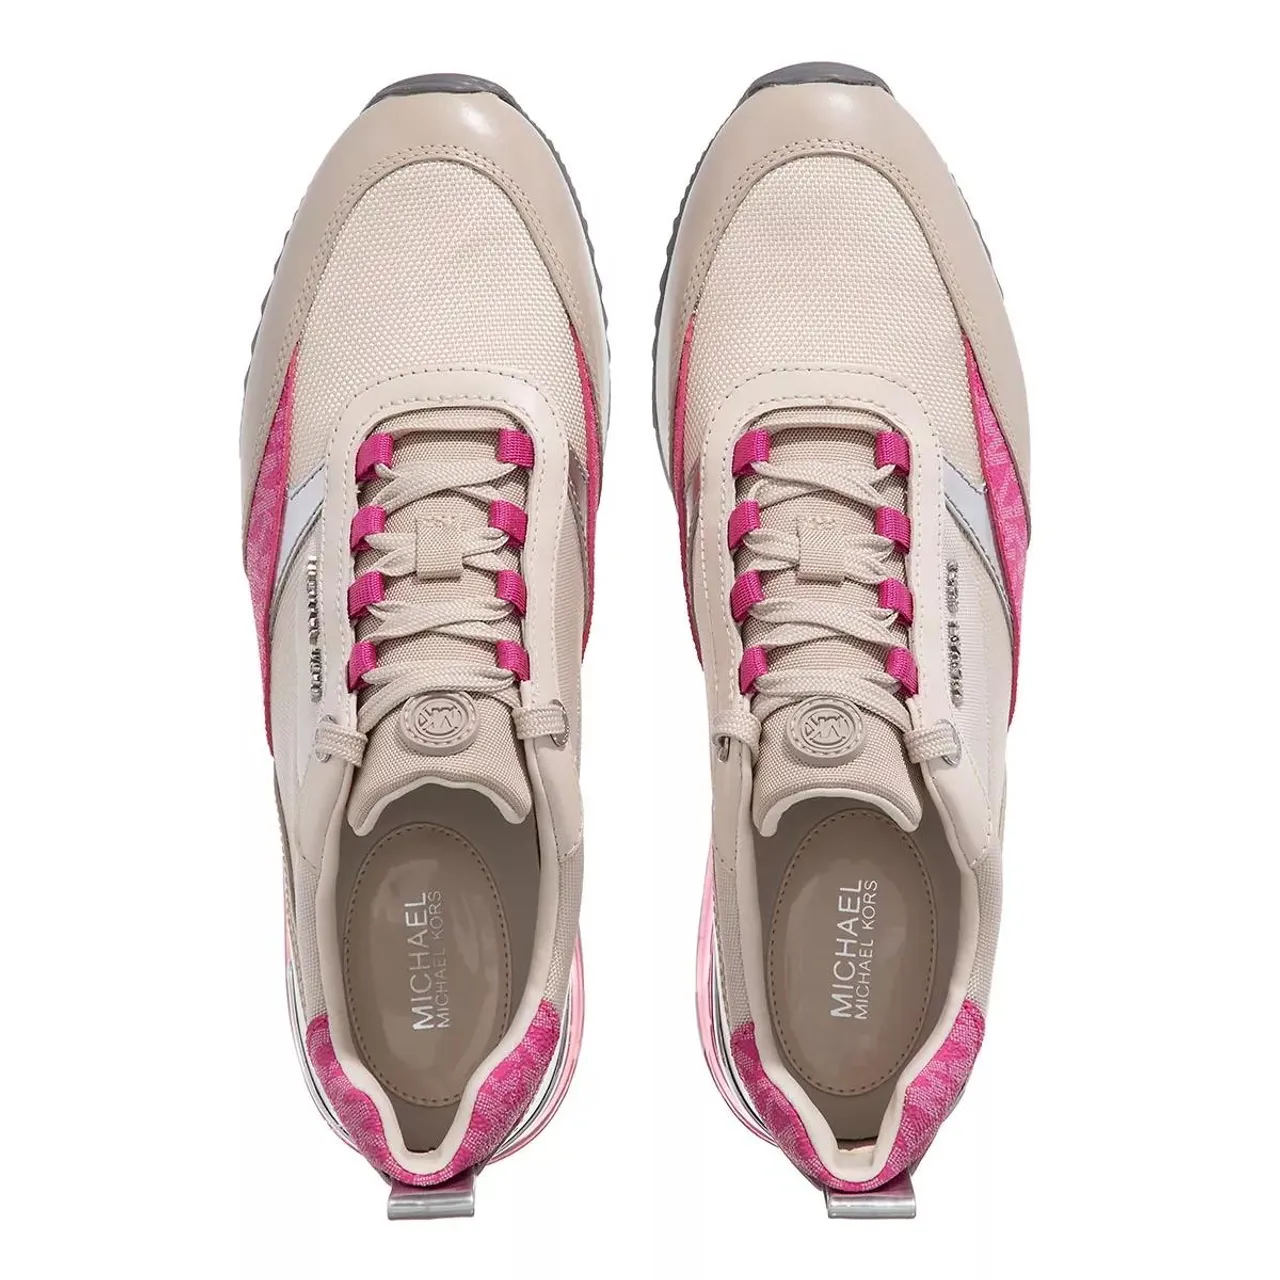 Michael Kors Sneakers - Allie Stride Extreme